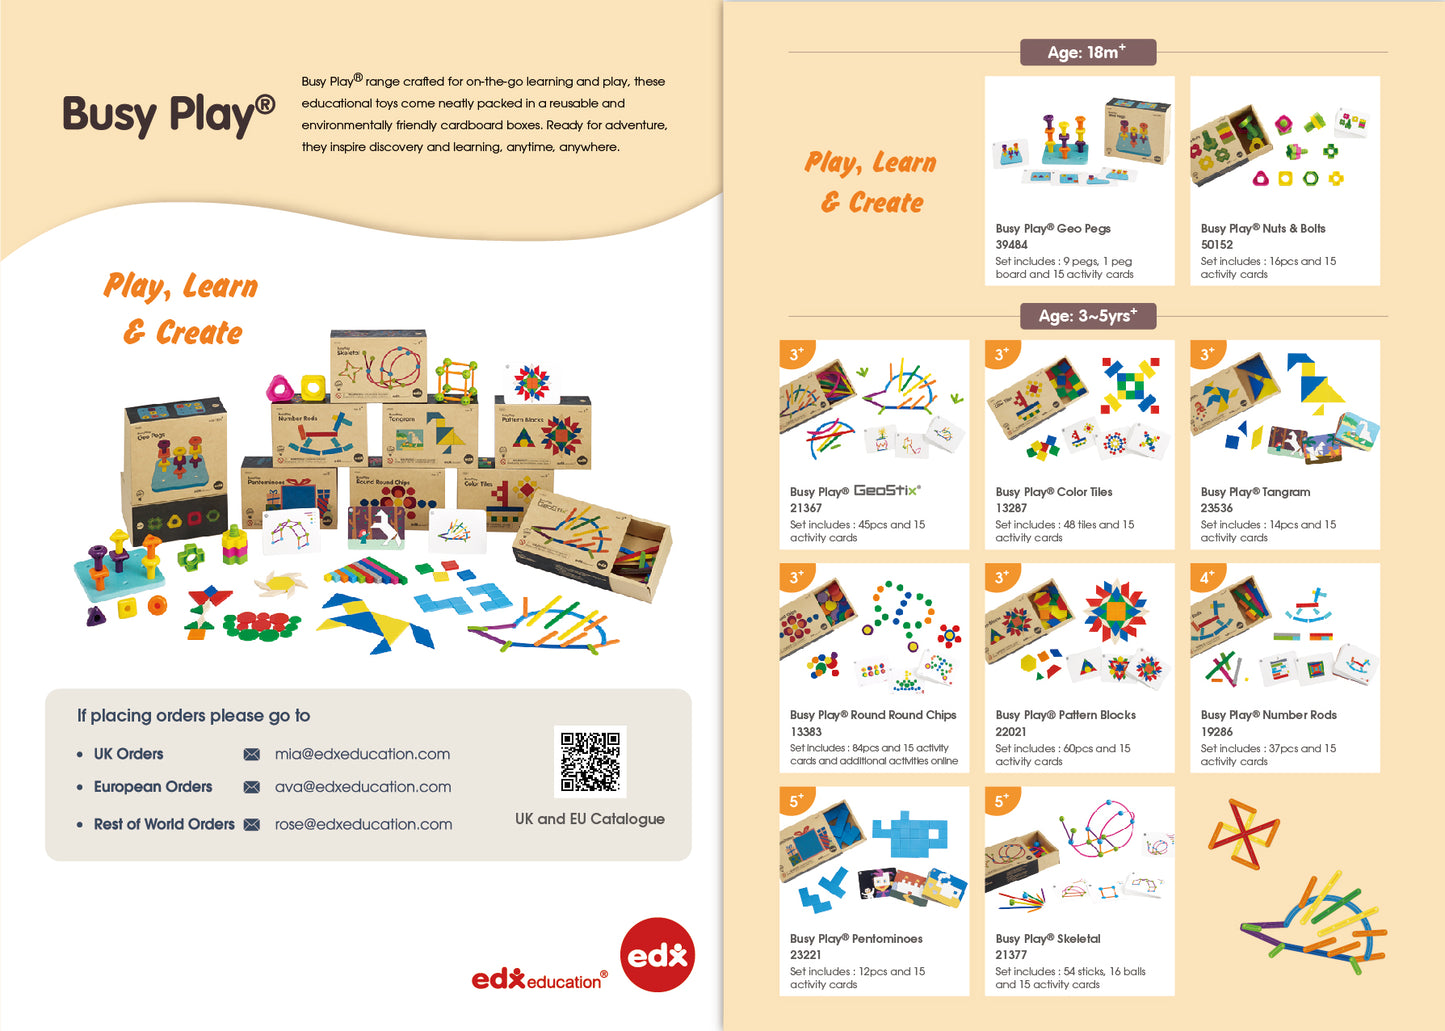 Discover the New Busy Play® Range by Edx Education®